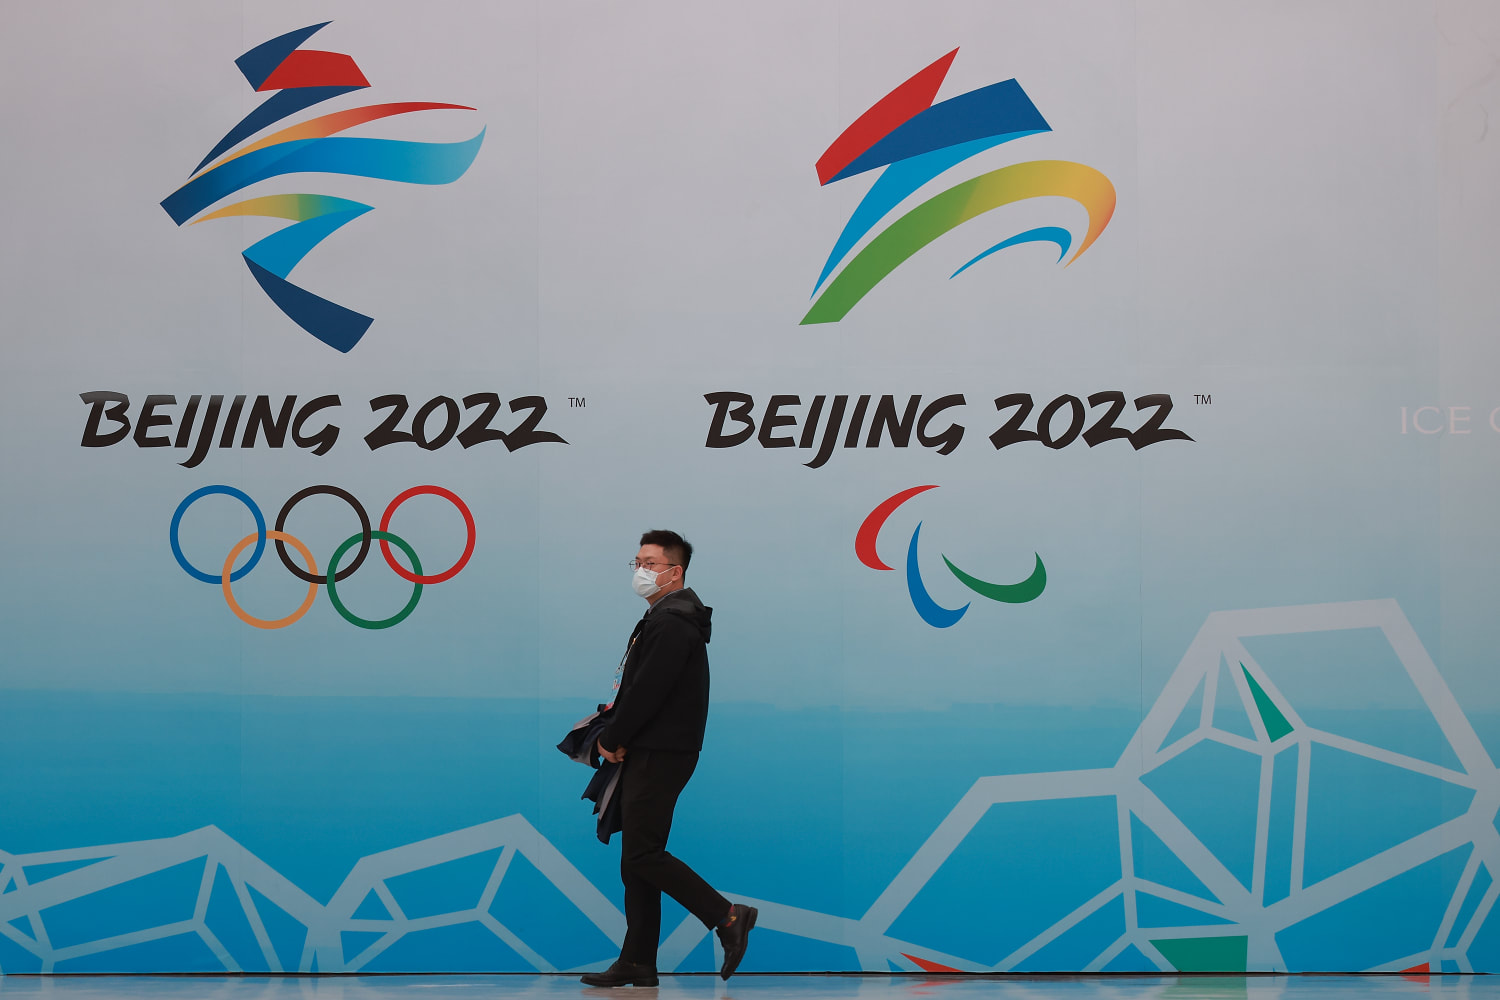 North Korea says it will miss Beijing Olympics, blaming pandemic and ‘hostile forces’